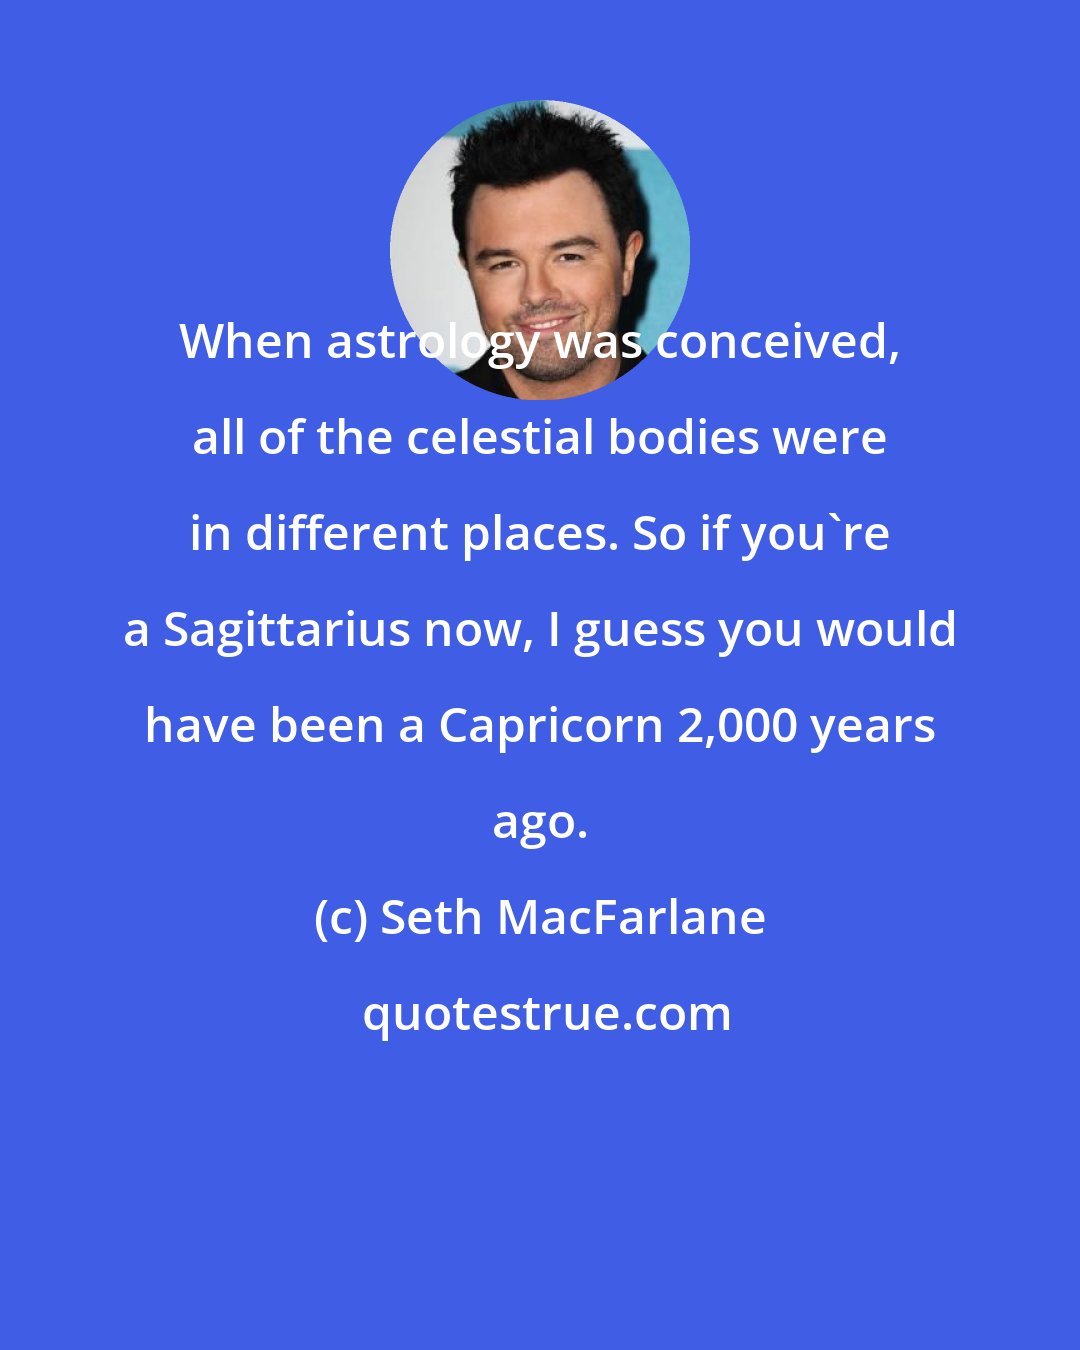 Seth MacFarlane: When astrology was conceived, all of the celestial bodies were in different places. So if you're a Sagittarius now, I guess you would have been a Capricorn 2,000 years ago.